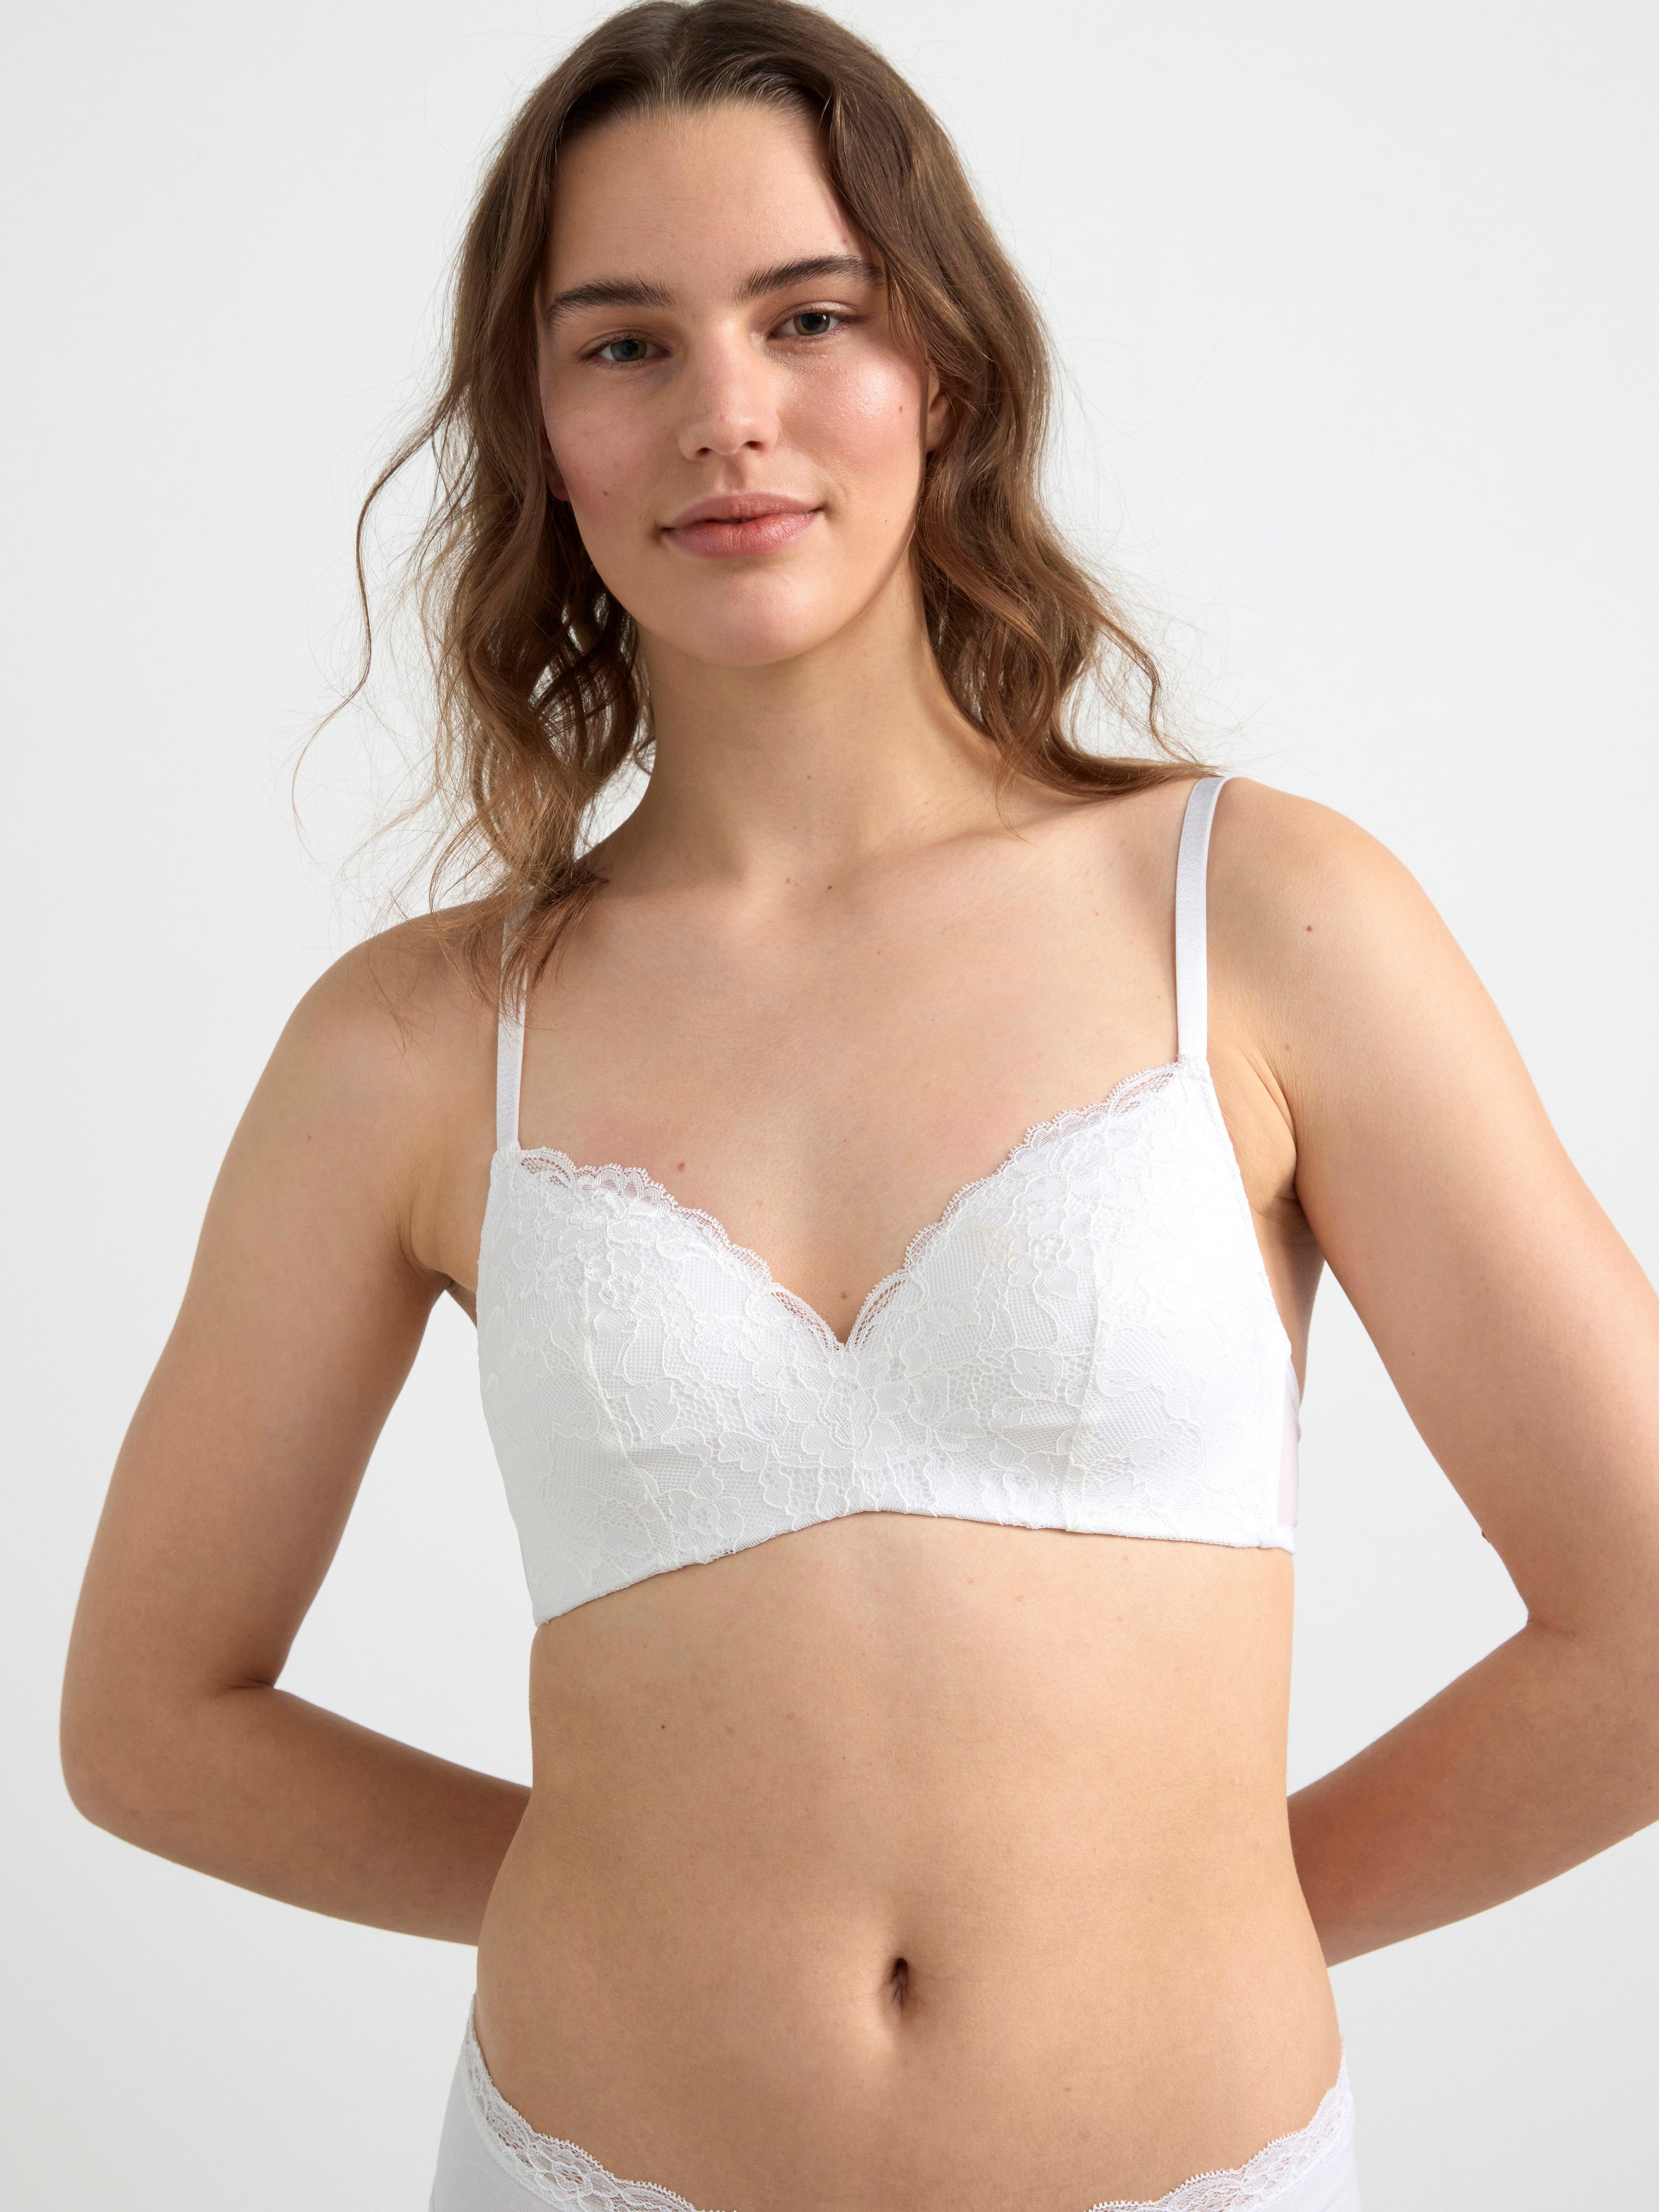 https://i8.amplience.net/i/Lindex/7954306_70_PS_MB/white-flora-wirefree-bra-with-lace?fmt=auto&$qltDefault$&$cache$&$crop$&$scaleFit$&$productDetailSwiperV2$&vw=600&$crop2x$&$fmtQlt2x$